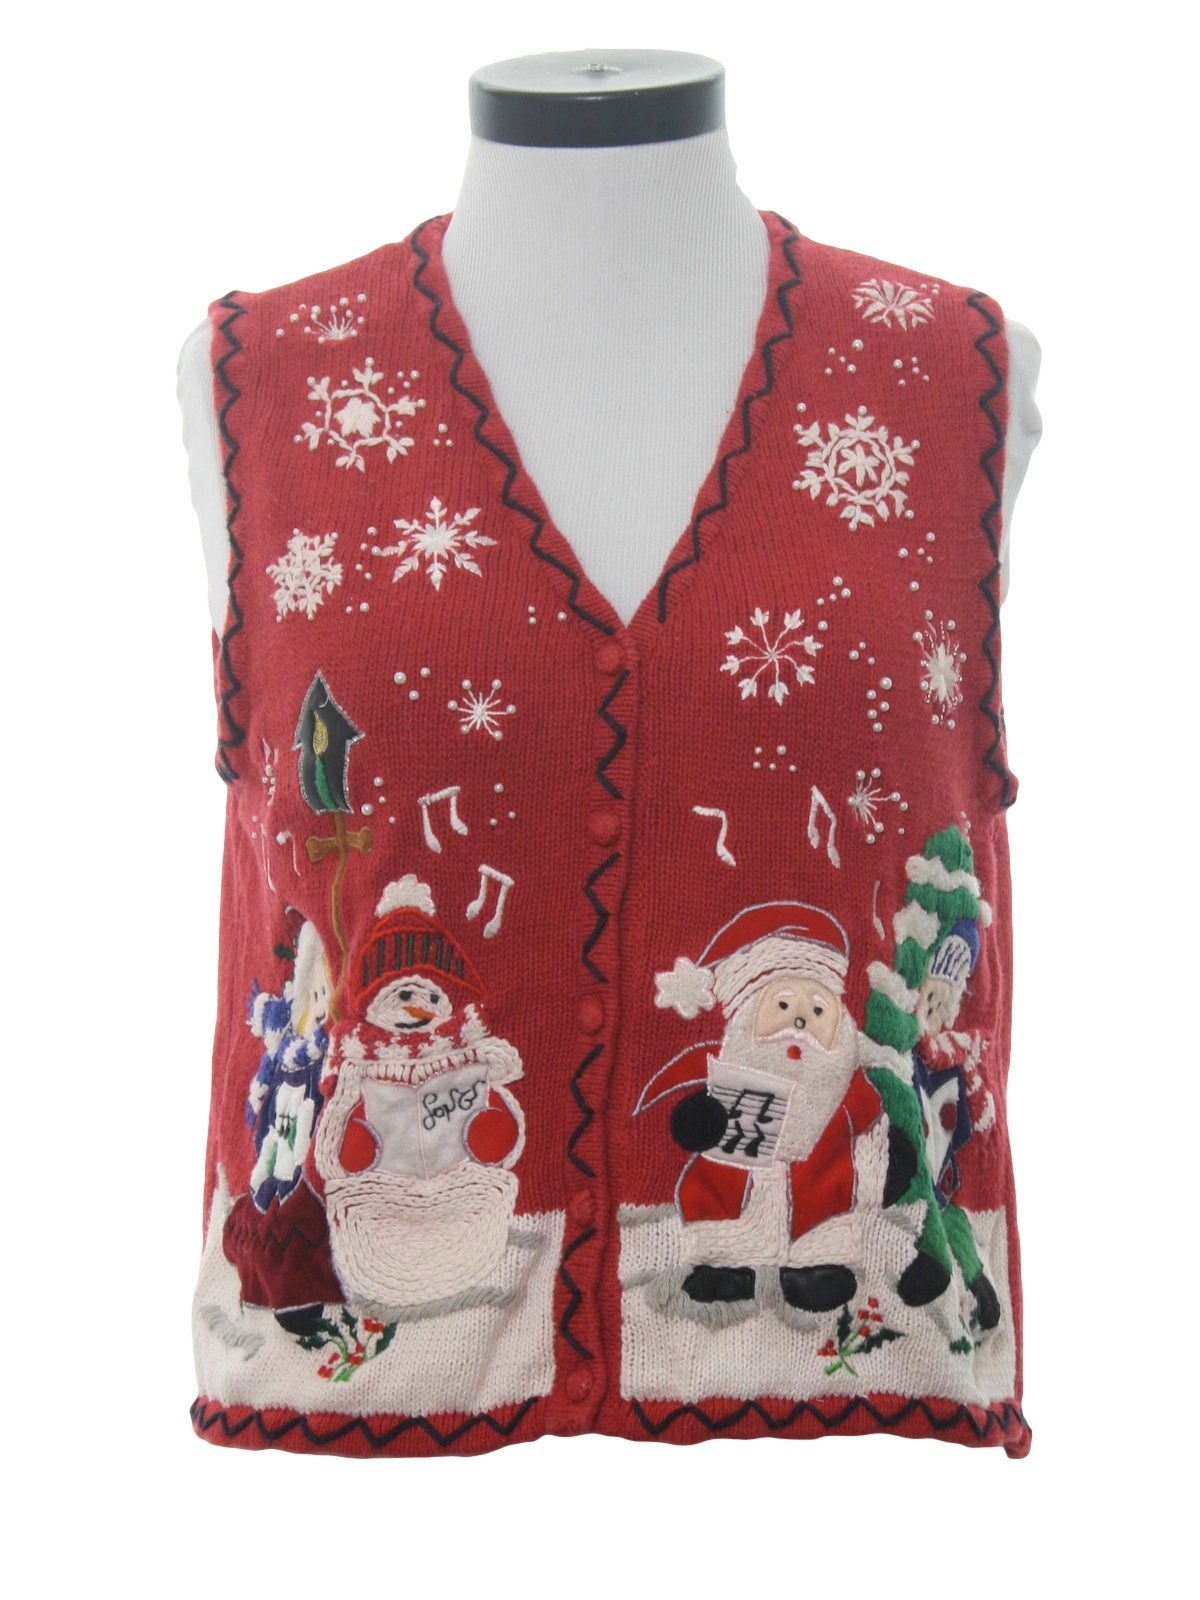 Womens Ugly Christmas Sweater Vest: -Hampshire Studio- Womens red ...